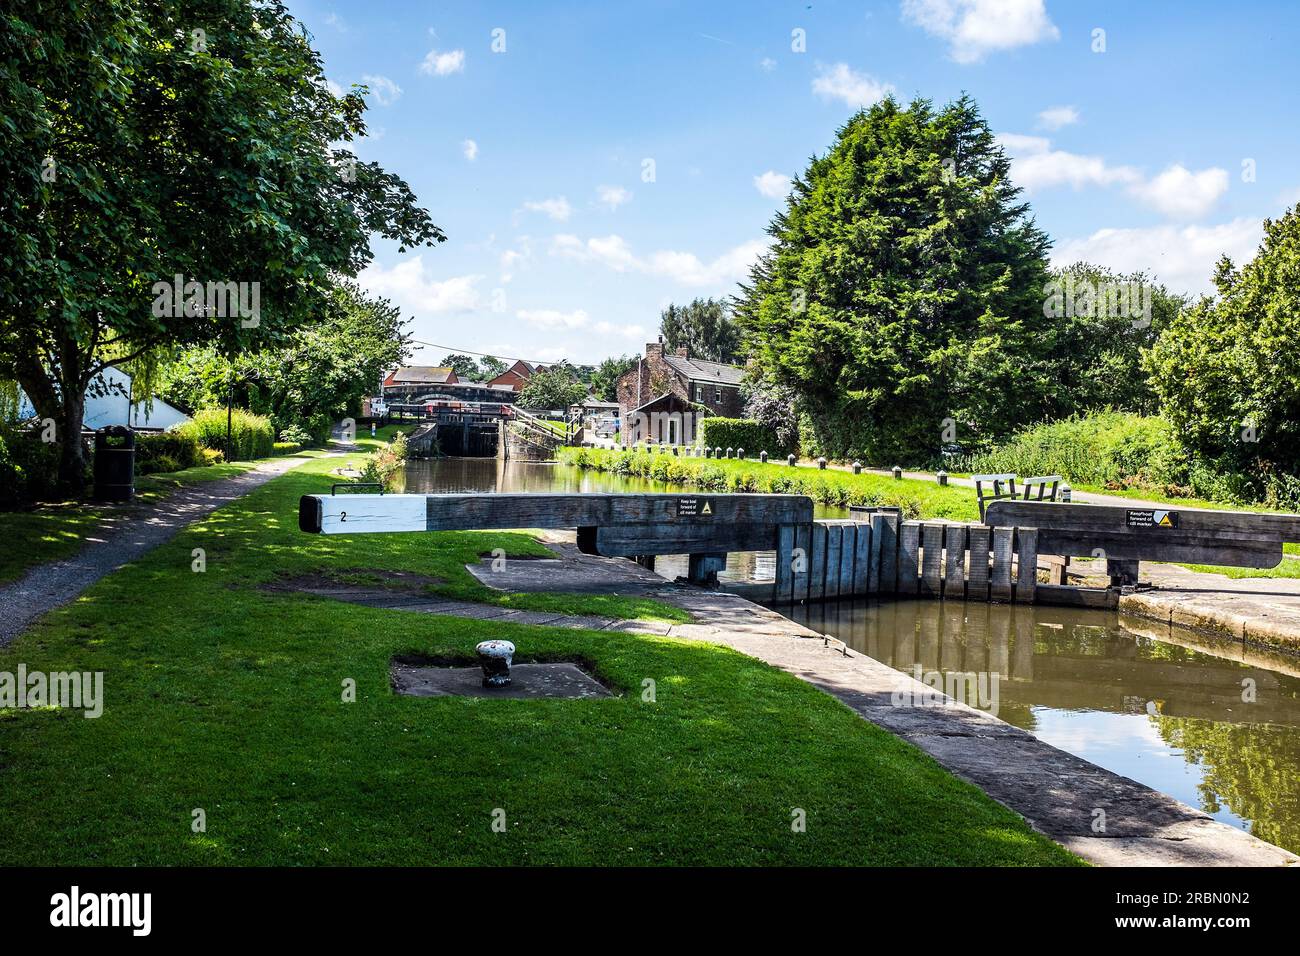 Top Lock on the Rufford branch of the Leeds - Liverpool canal. Stock Photo